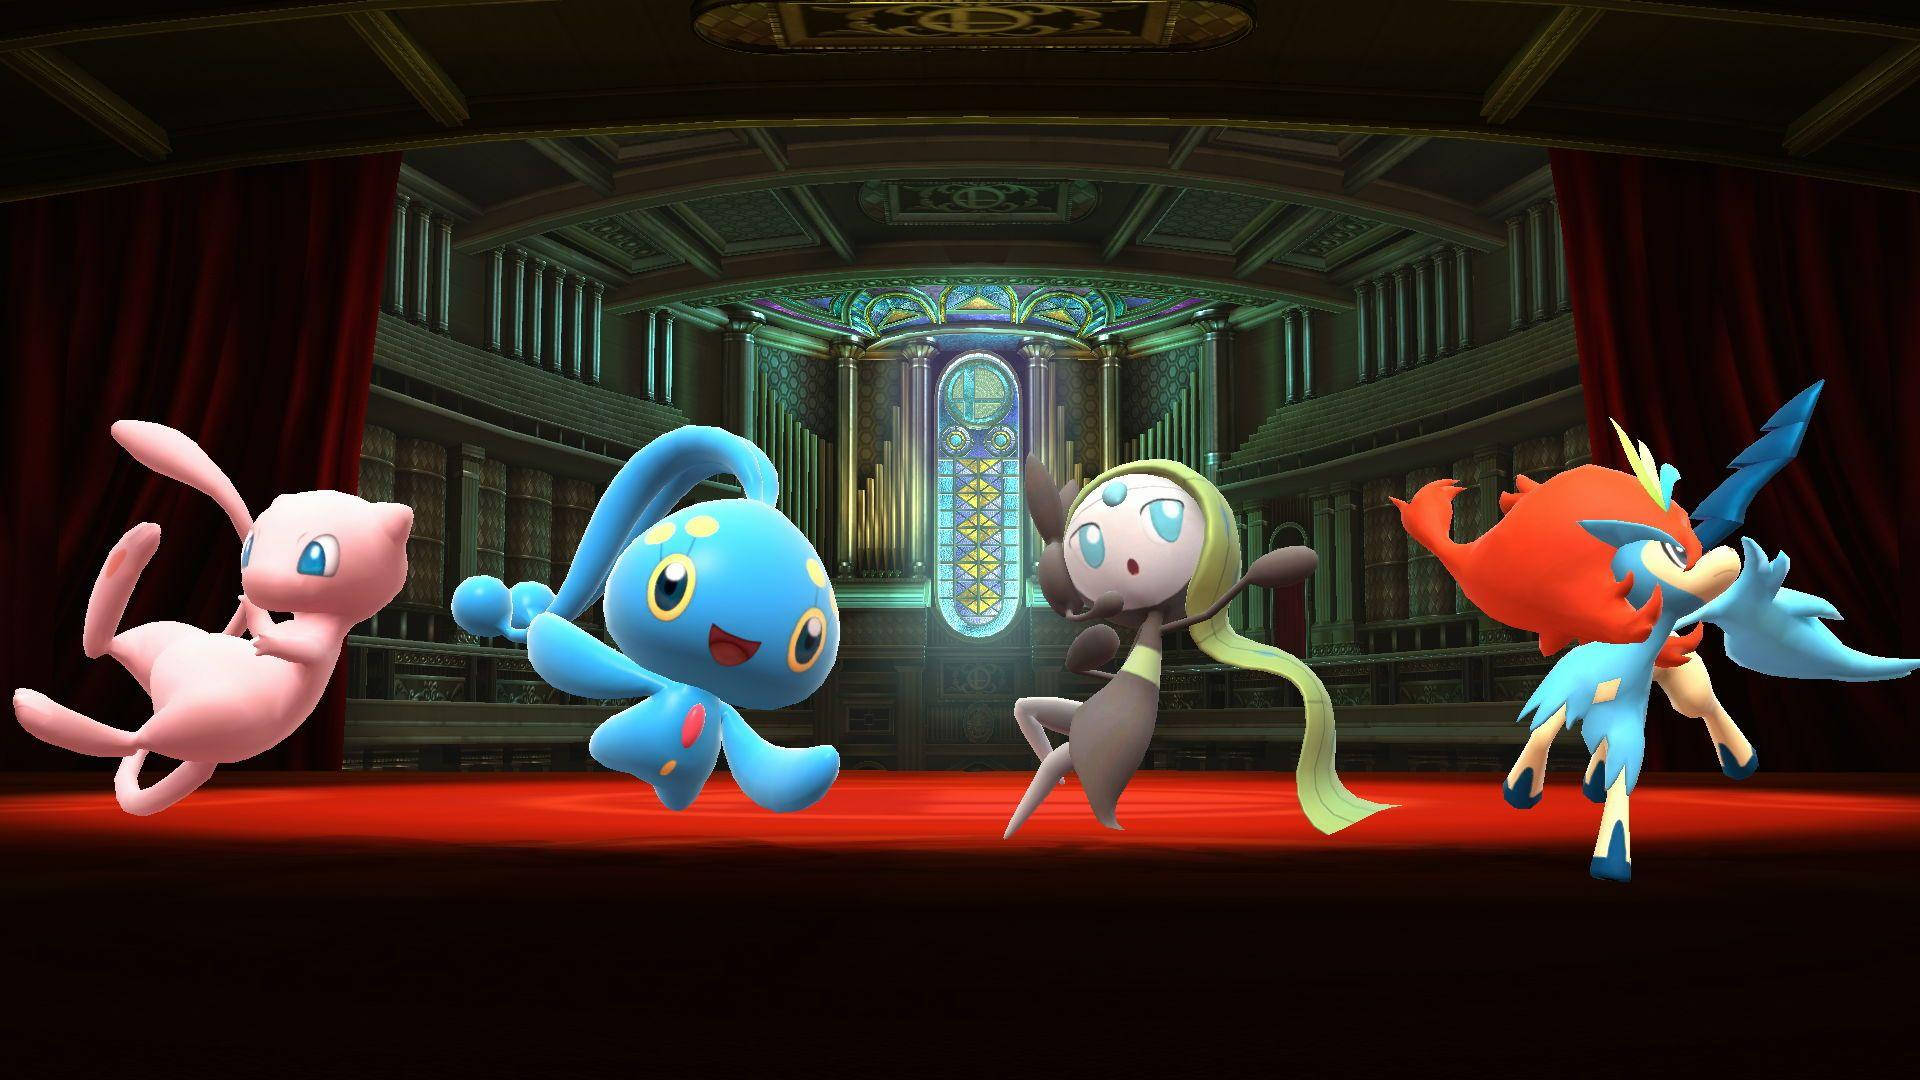 Manaphy, The Prince of the Sea, Strikes a Pose on Stage Wallpaper